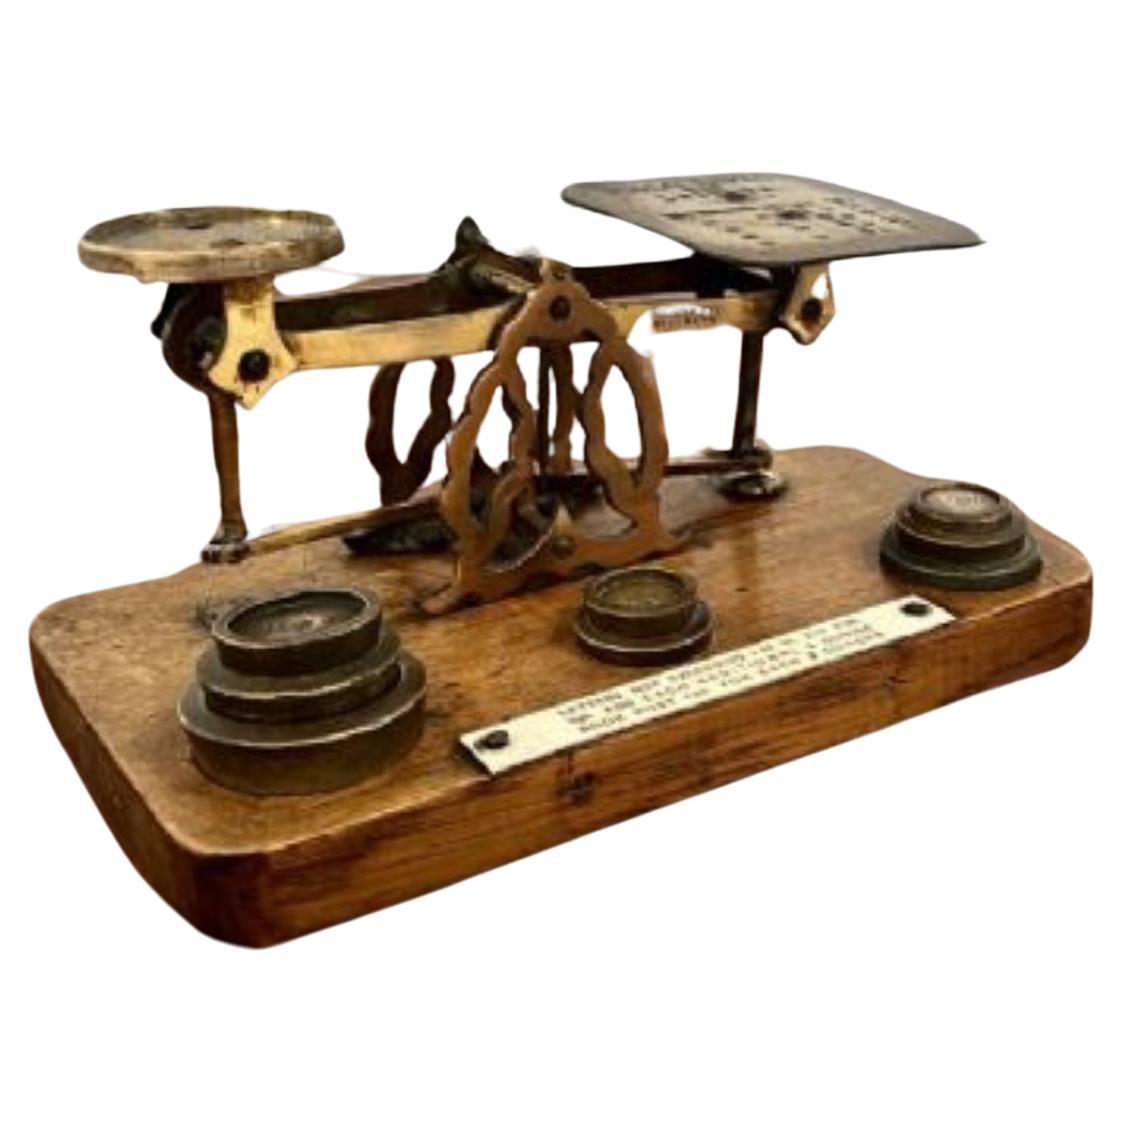 Lovely set of quality antique Victorian letter and postal scales and weights